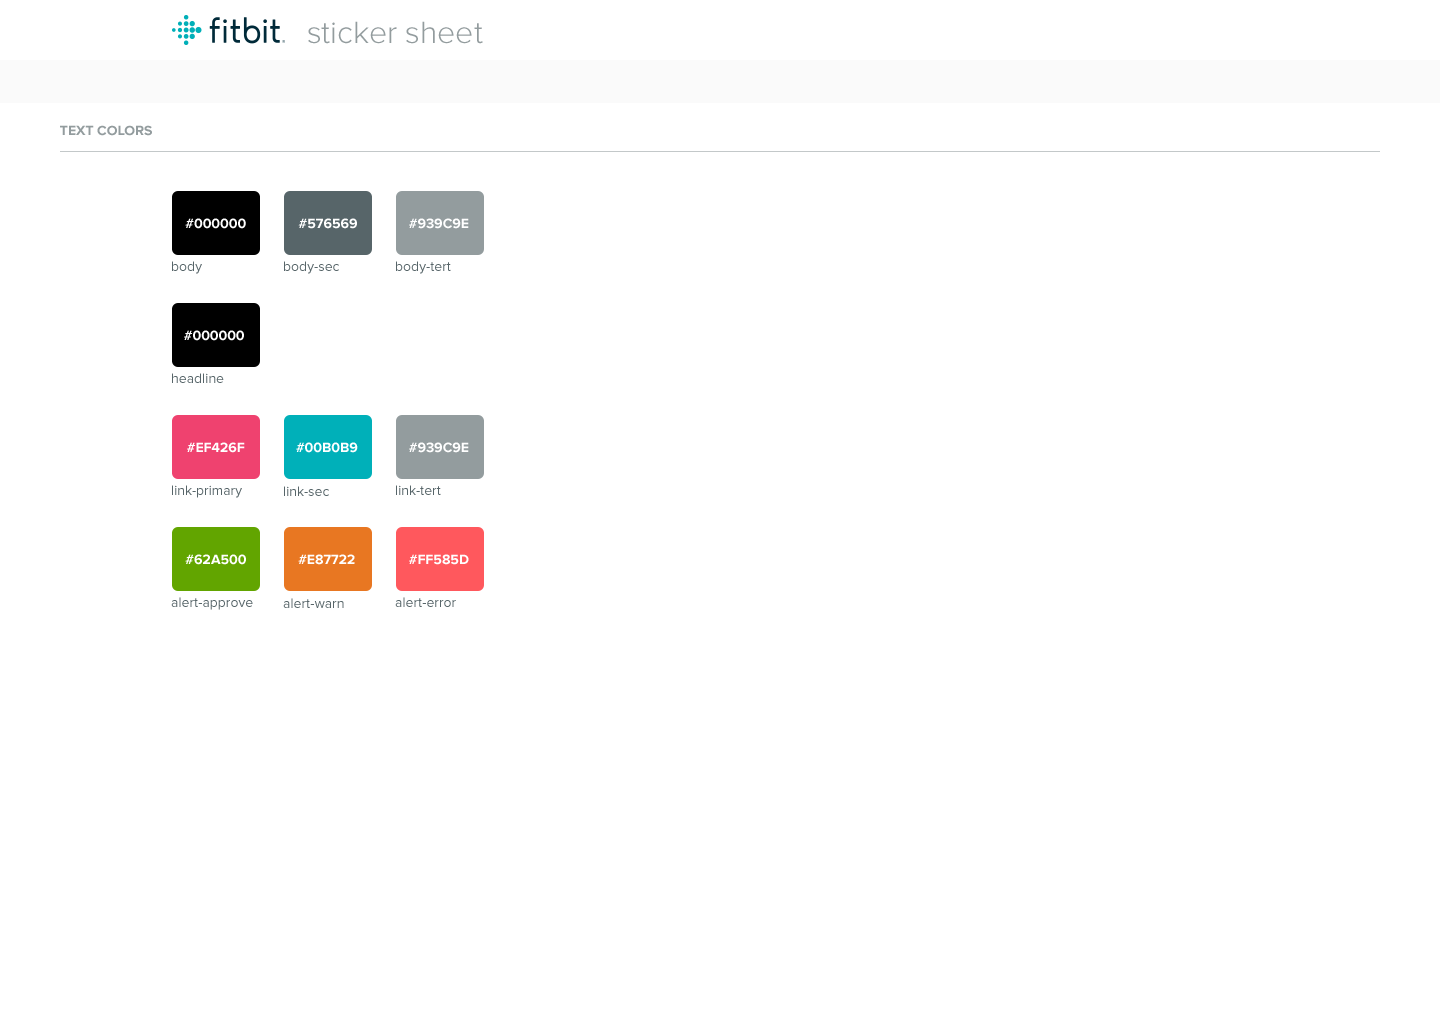 Fitbit_style-guide_0000_sticker_sheet_textcolors.png